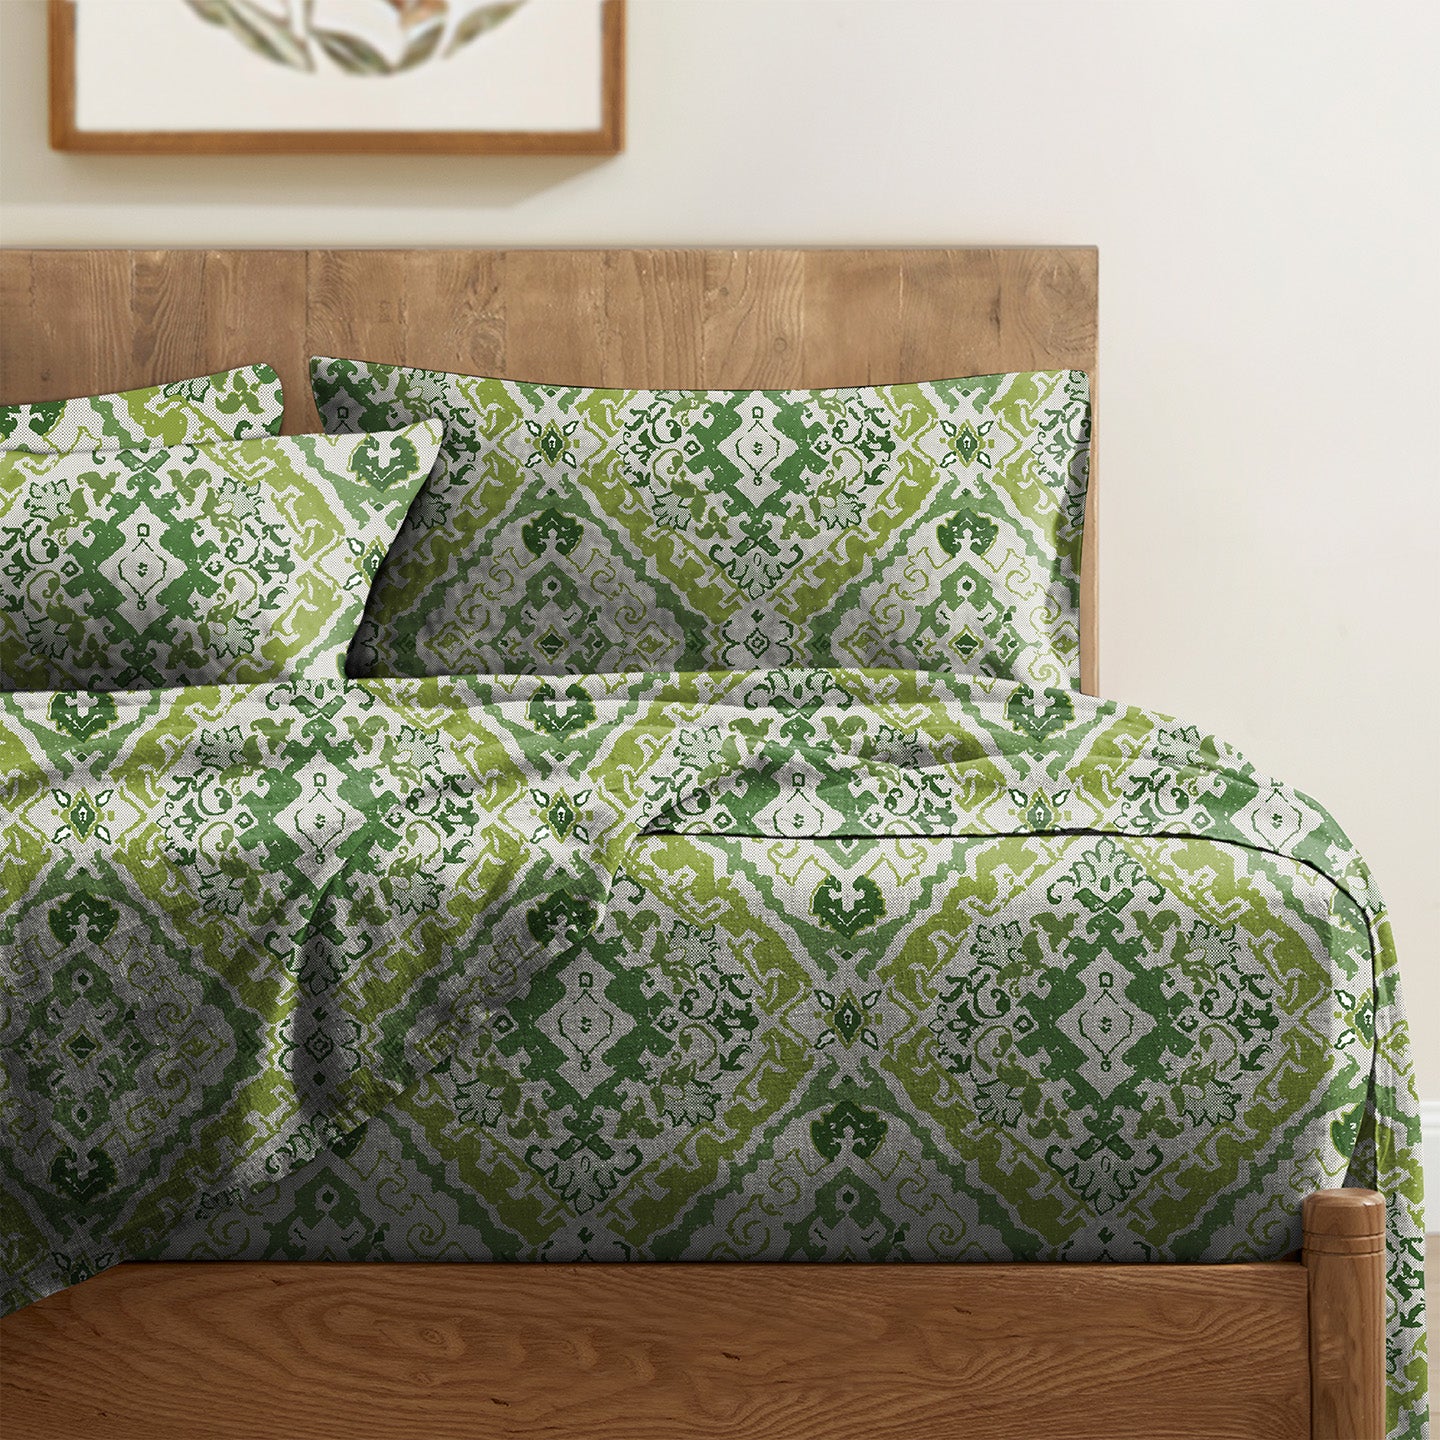 MOROCCO SPRING GREEN BEDCOVER FOR DOUBLE BED WITH 2 PILLOWCOVERS KING SIZE (104" X 90")